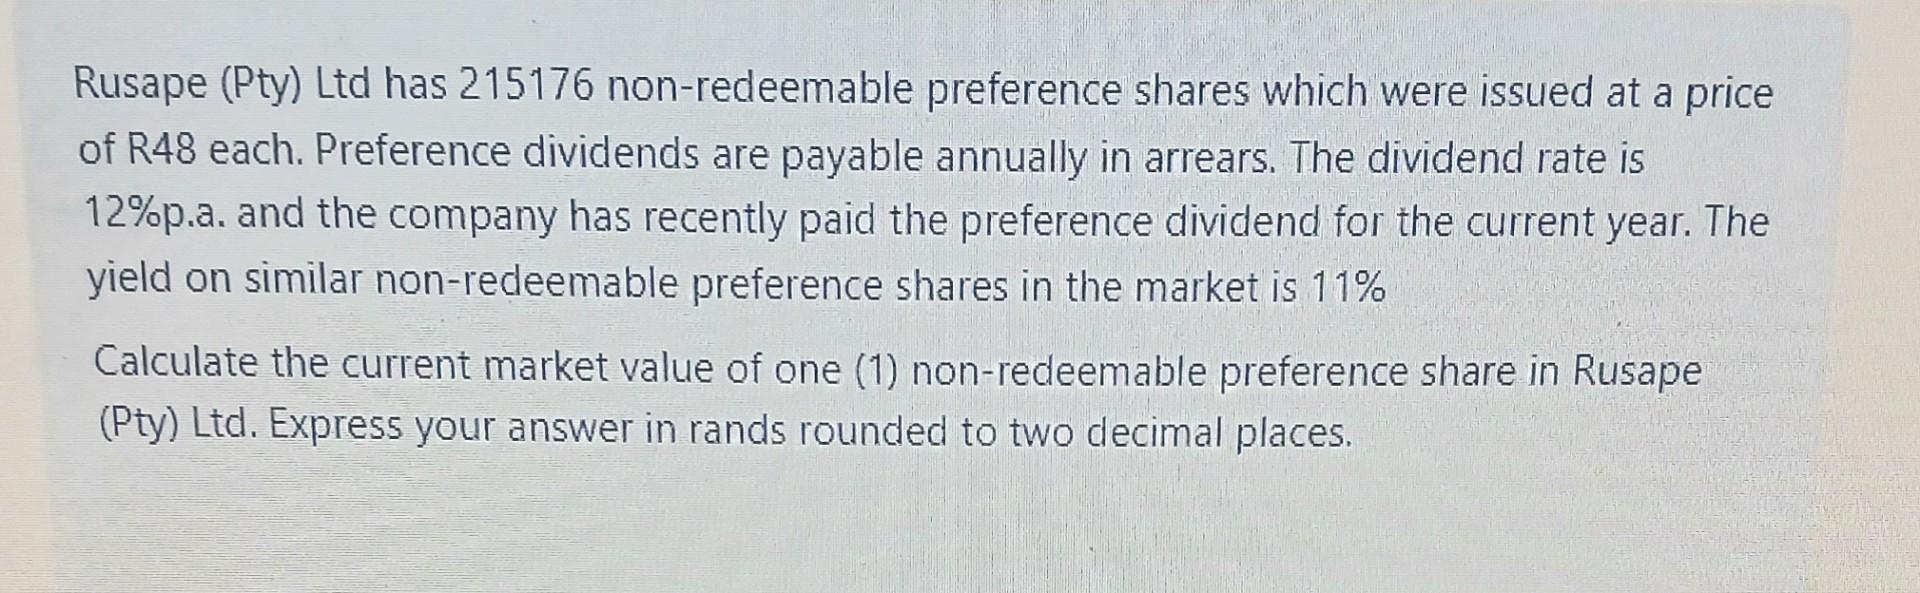 Rusape (Pty) Ltd has 215176 non-redeemable preference shares which were issued at a price of R48 each.